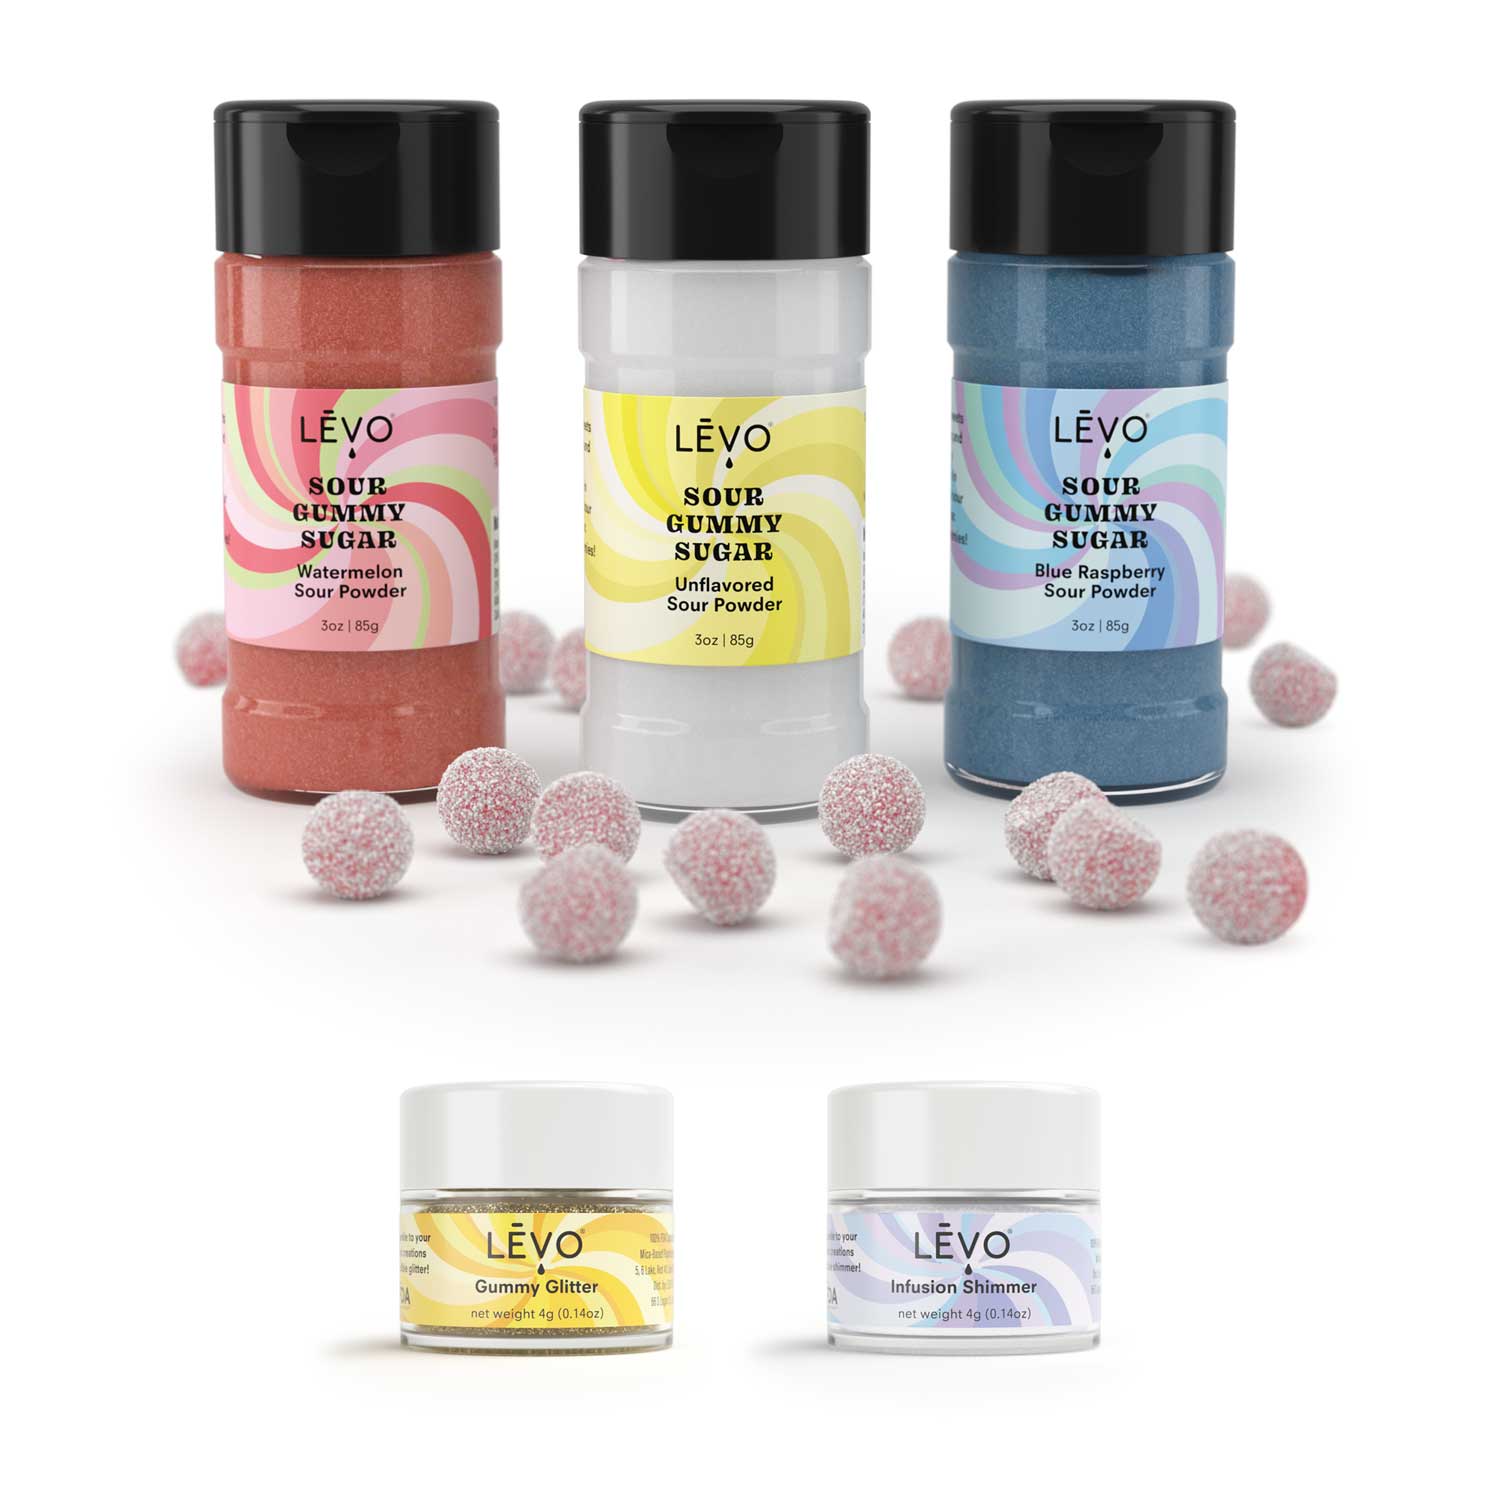 LEVO Gummy Decorating Kit with gold gummy glitter and infusion shimmer, and the sour gummy sugar variety 3 pack. Gummy Decorating Kit with Edible Glitter, Shimmer, and Sour Sugars for unique and vibrant gummy creations.